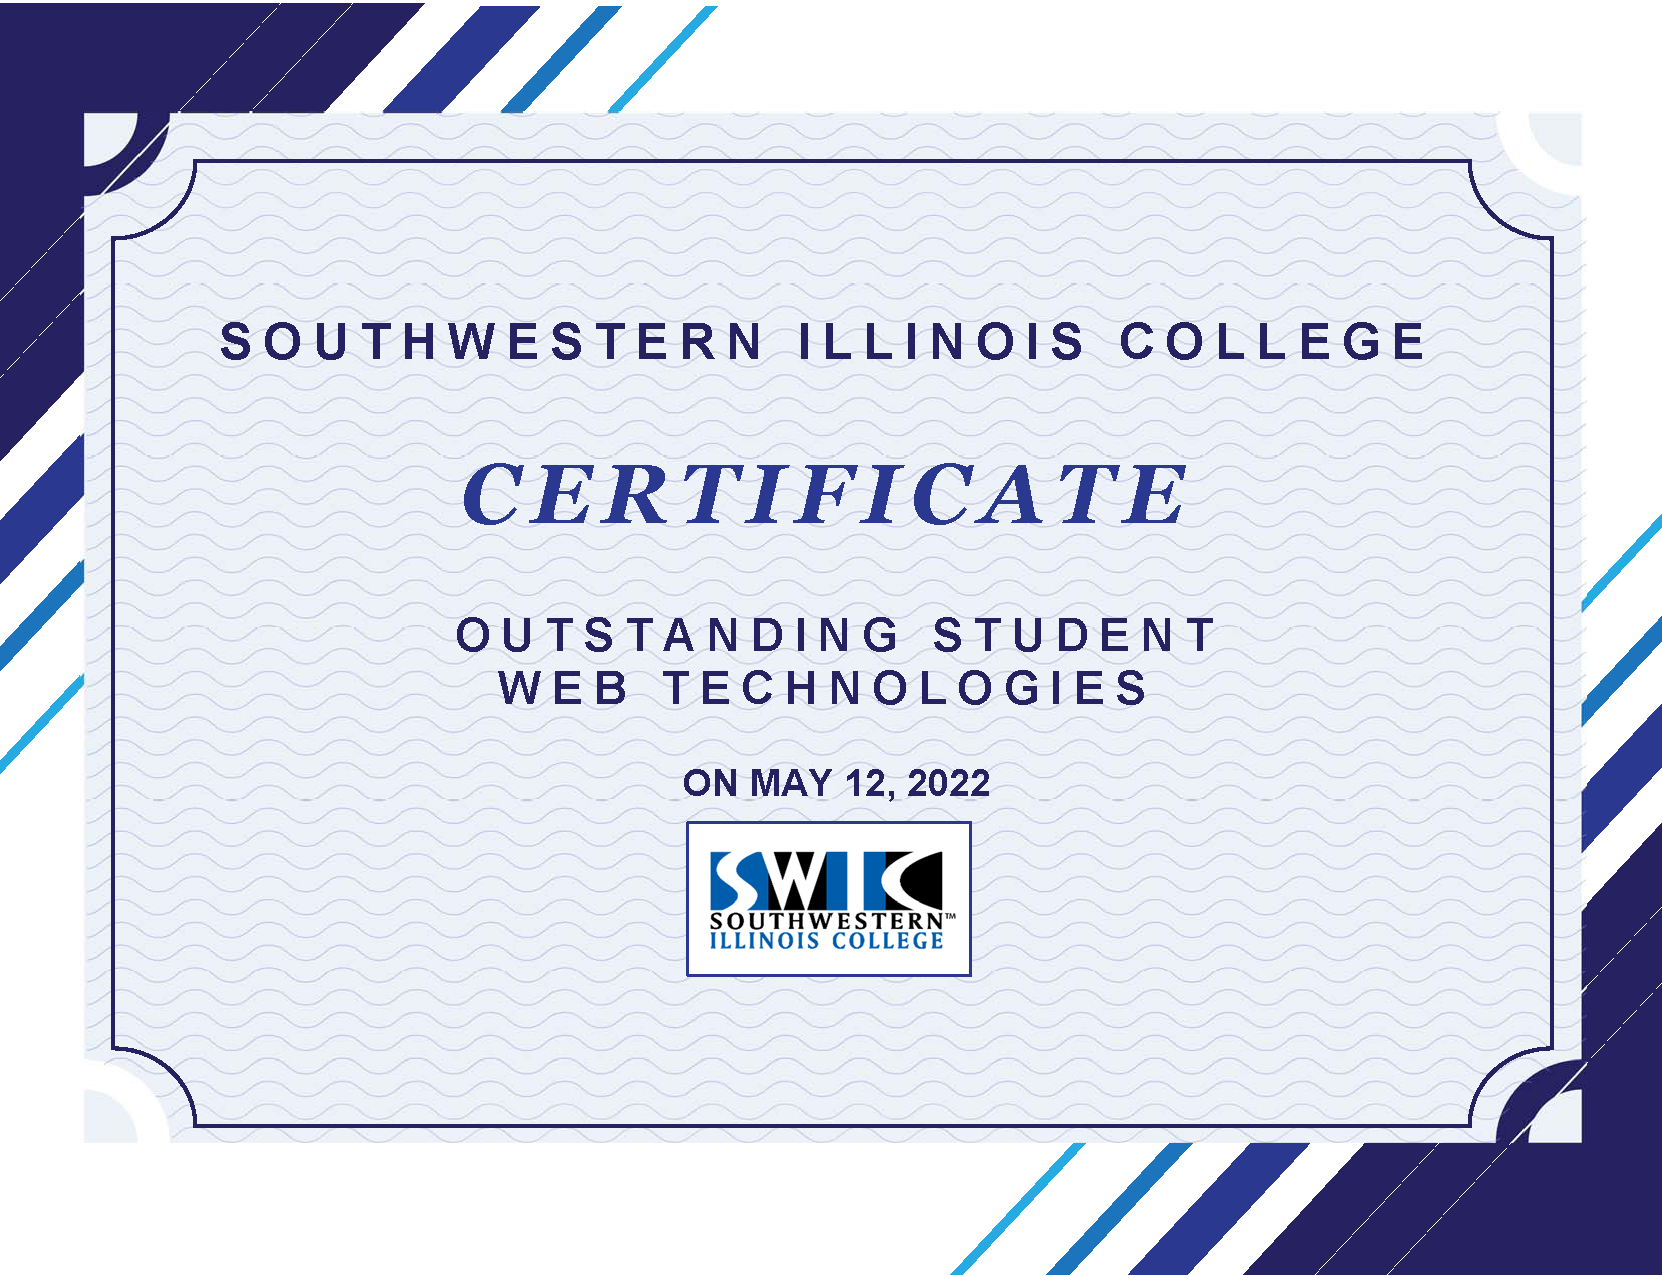 Southwestern Illinois College Certificate Outstanding Student Web Technologies